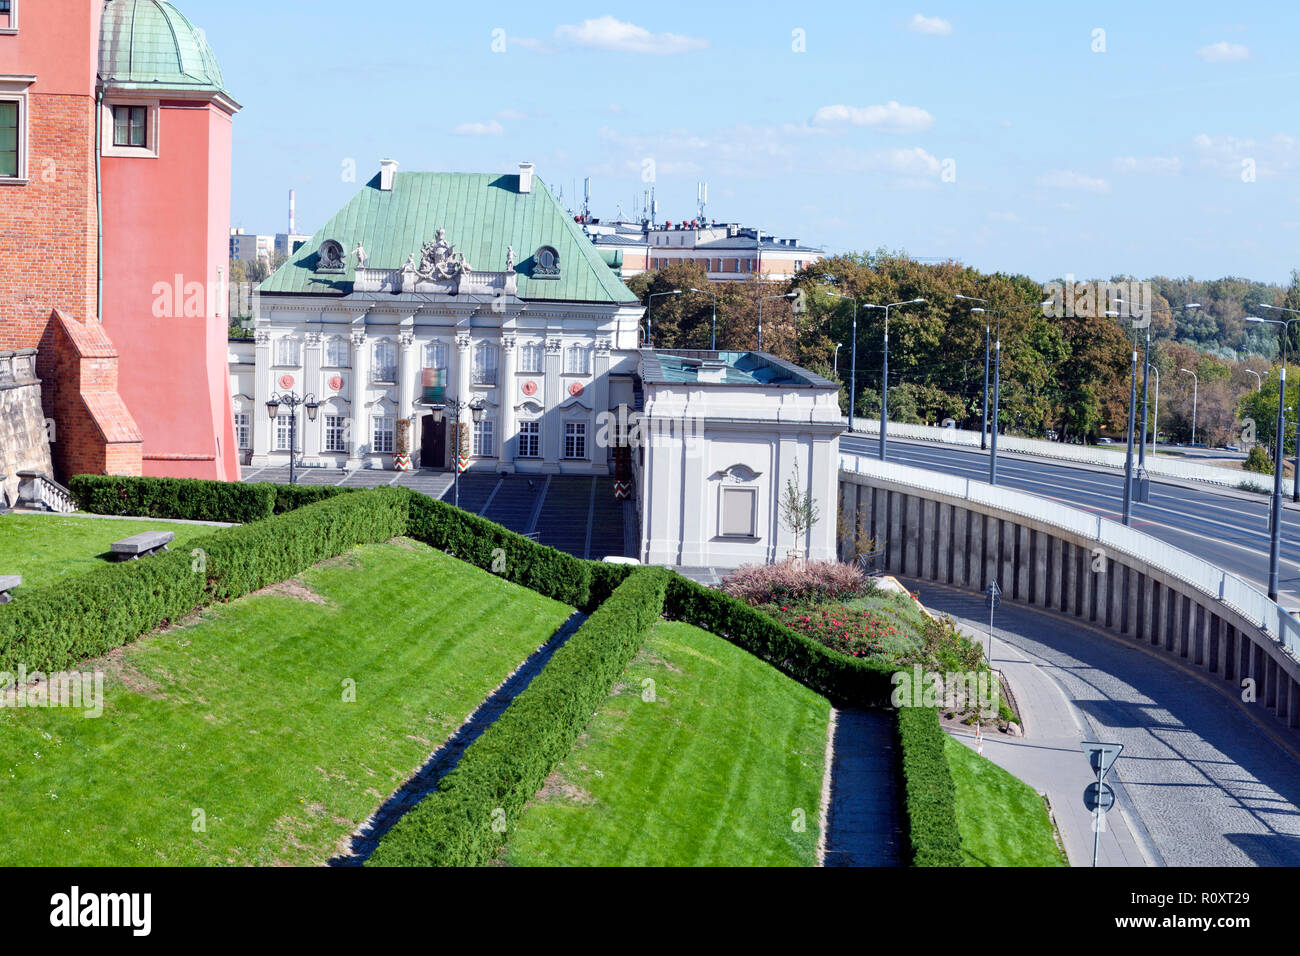 Capital city of Poland Warsaw, view near the Royal Castle over historic Copper Roof Palace, road Trasa W-Z . Stock Photo